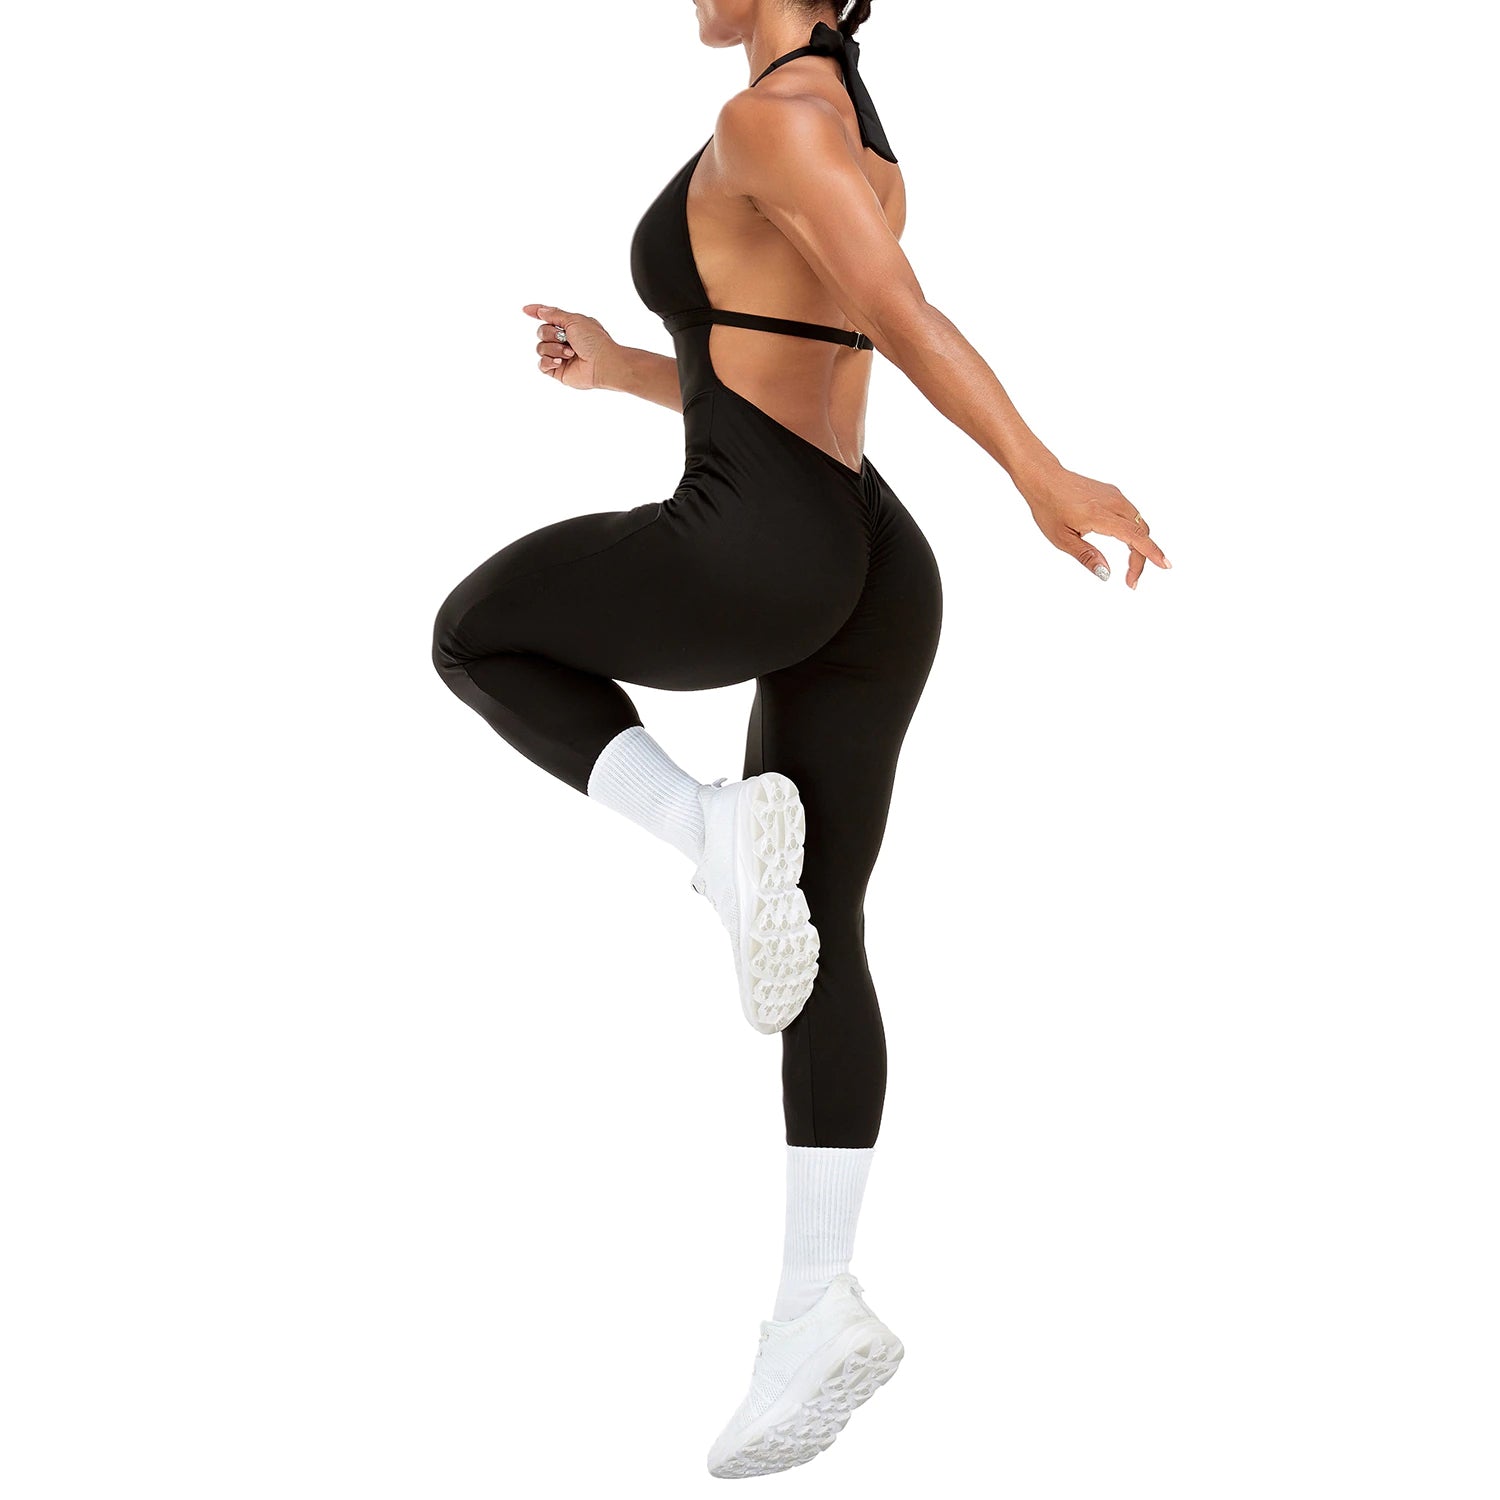 Buy Bodysuits Jumpsuit for Exercise, Soft and Sexy Activewear by Baller  Babe, Gymwear